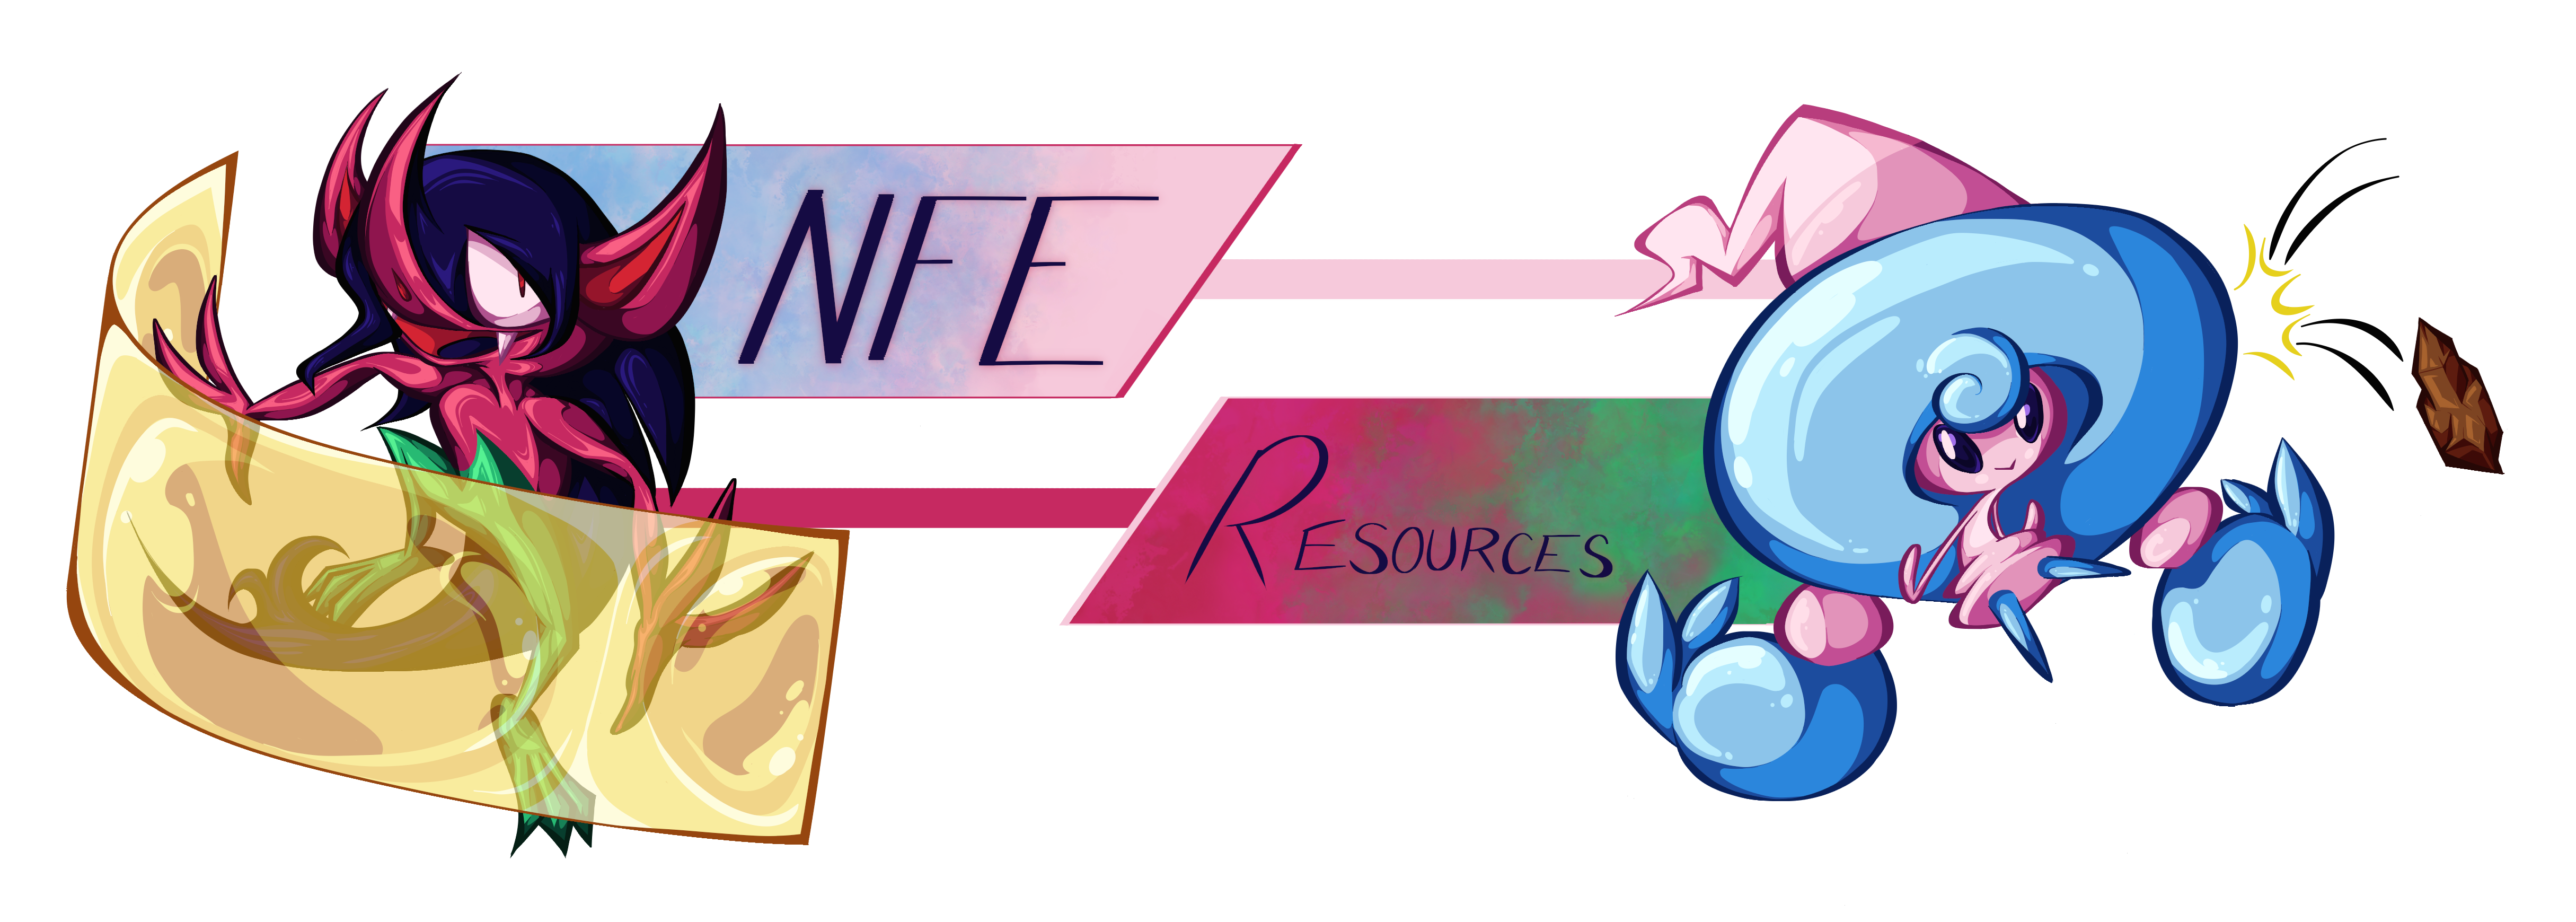 nfe resources 2.png